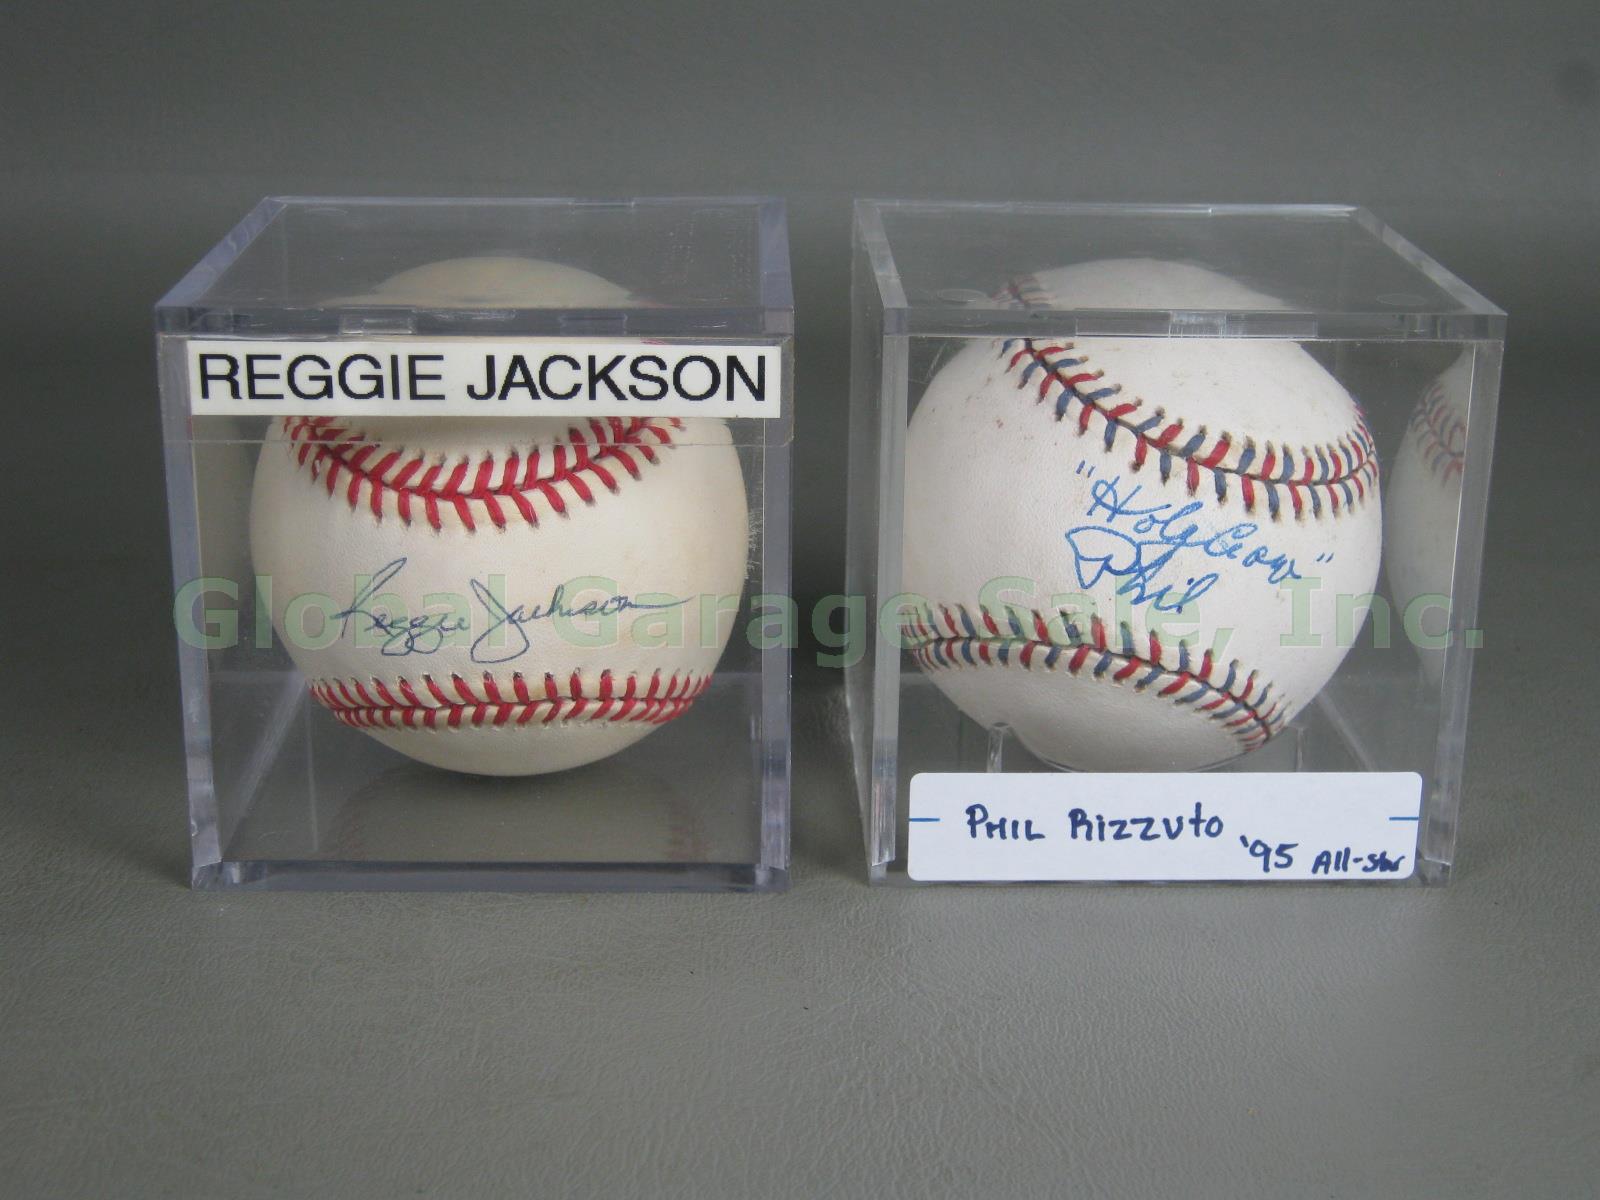 2 Signed Baseballs Phil Holy Cow Rizutto Reggie Jackson NY Yankees Hall Of Fame